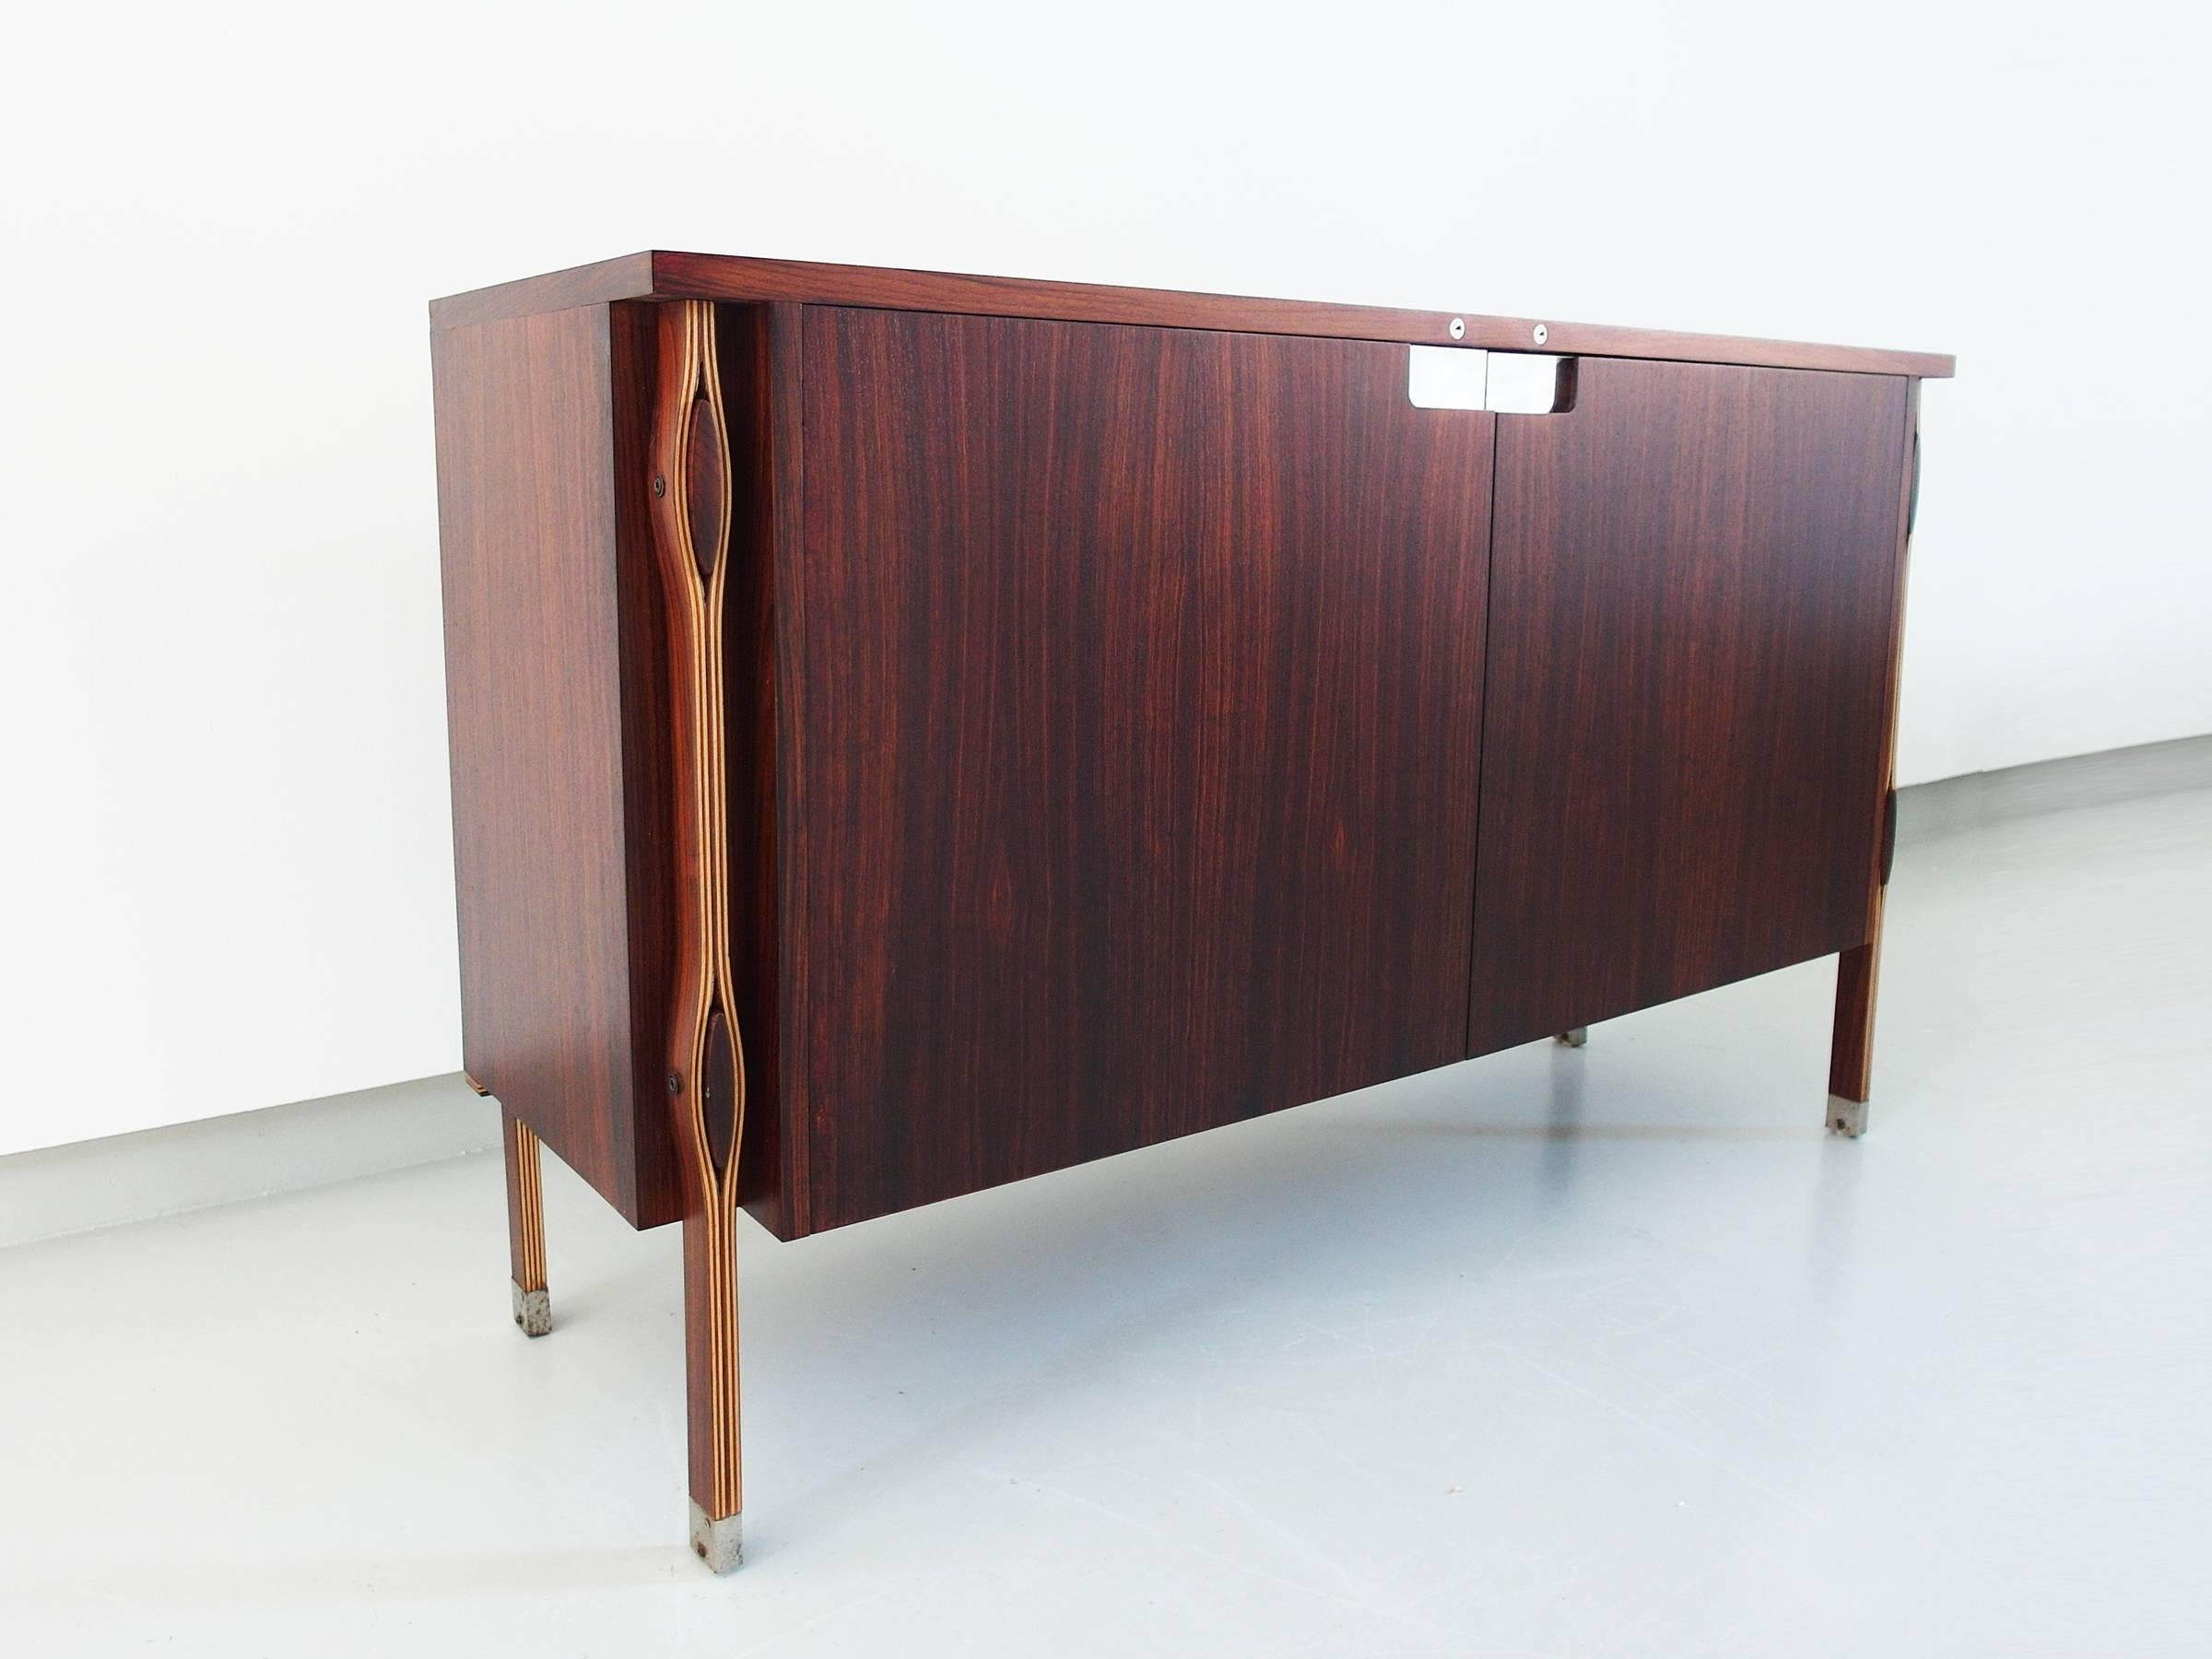 Superb and very rare Taormina credenza designed by Ico and Luisa Parisi and produced by MIM Roma, Italy 1958. The credenza is entirely finished in rosewood including the interior and rear face. It has an internal storage compartment with single